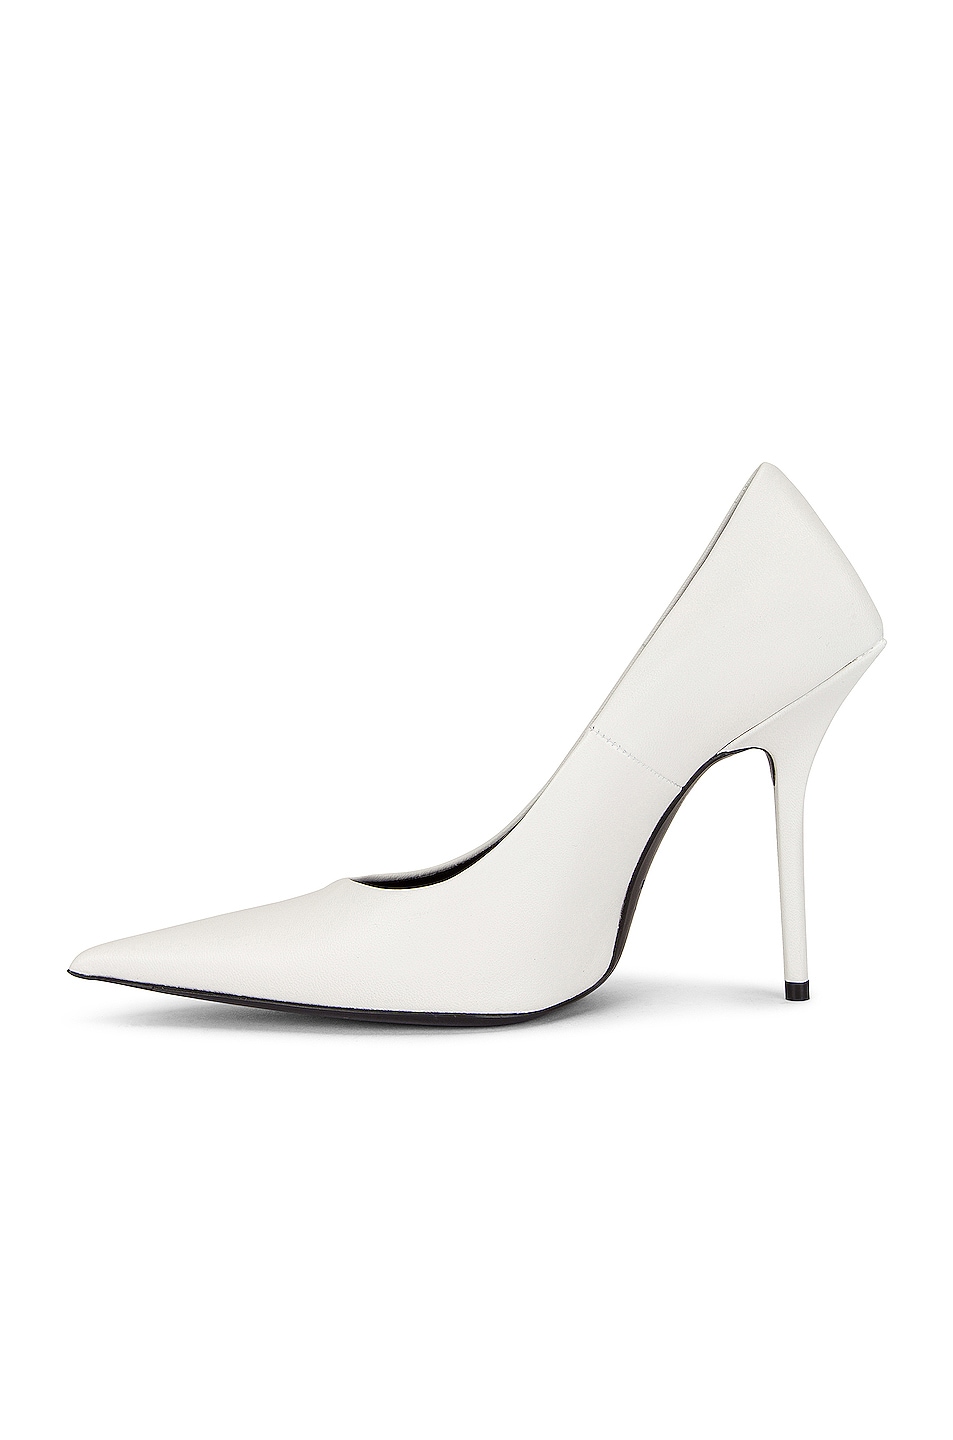 BB Patent Leather Pumps in White  Balenciaga  Mytheresa